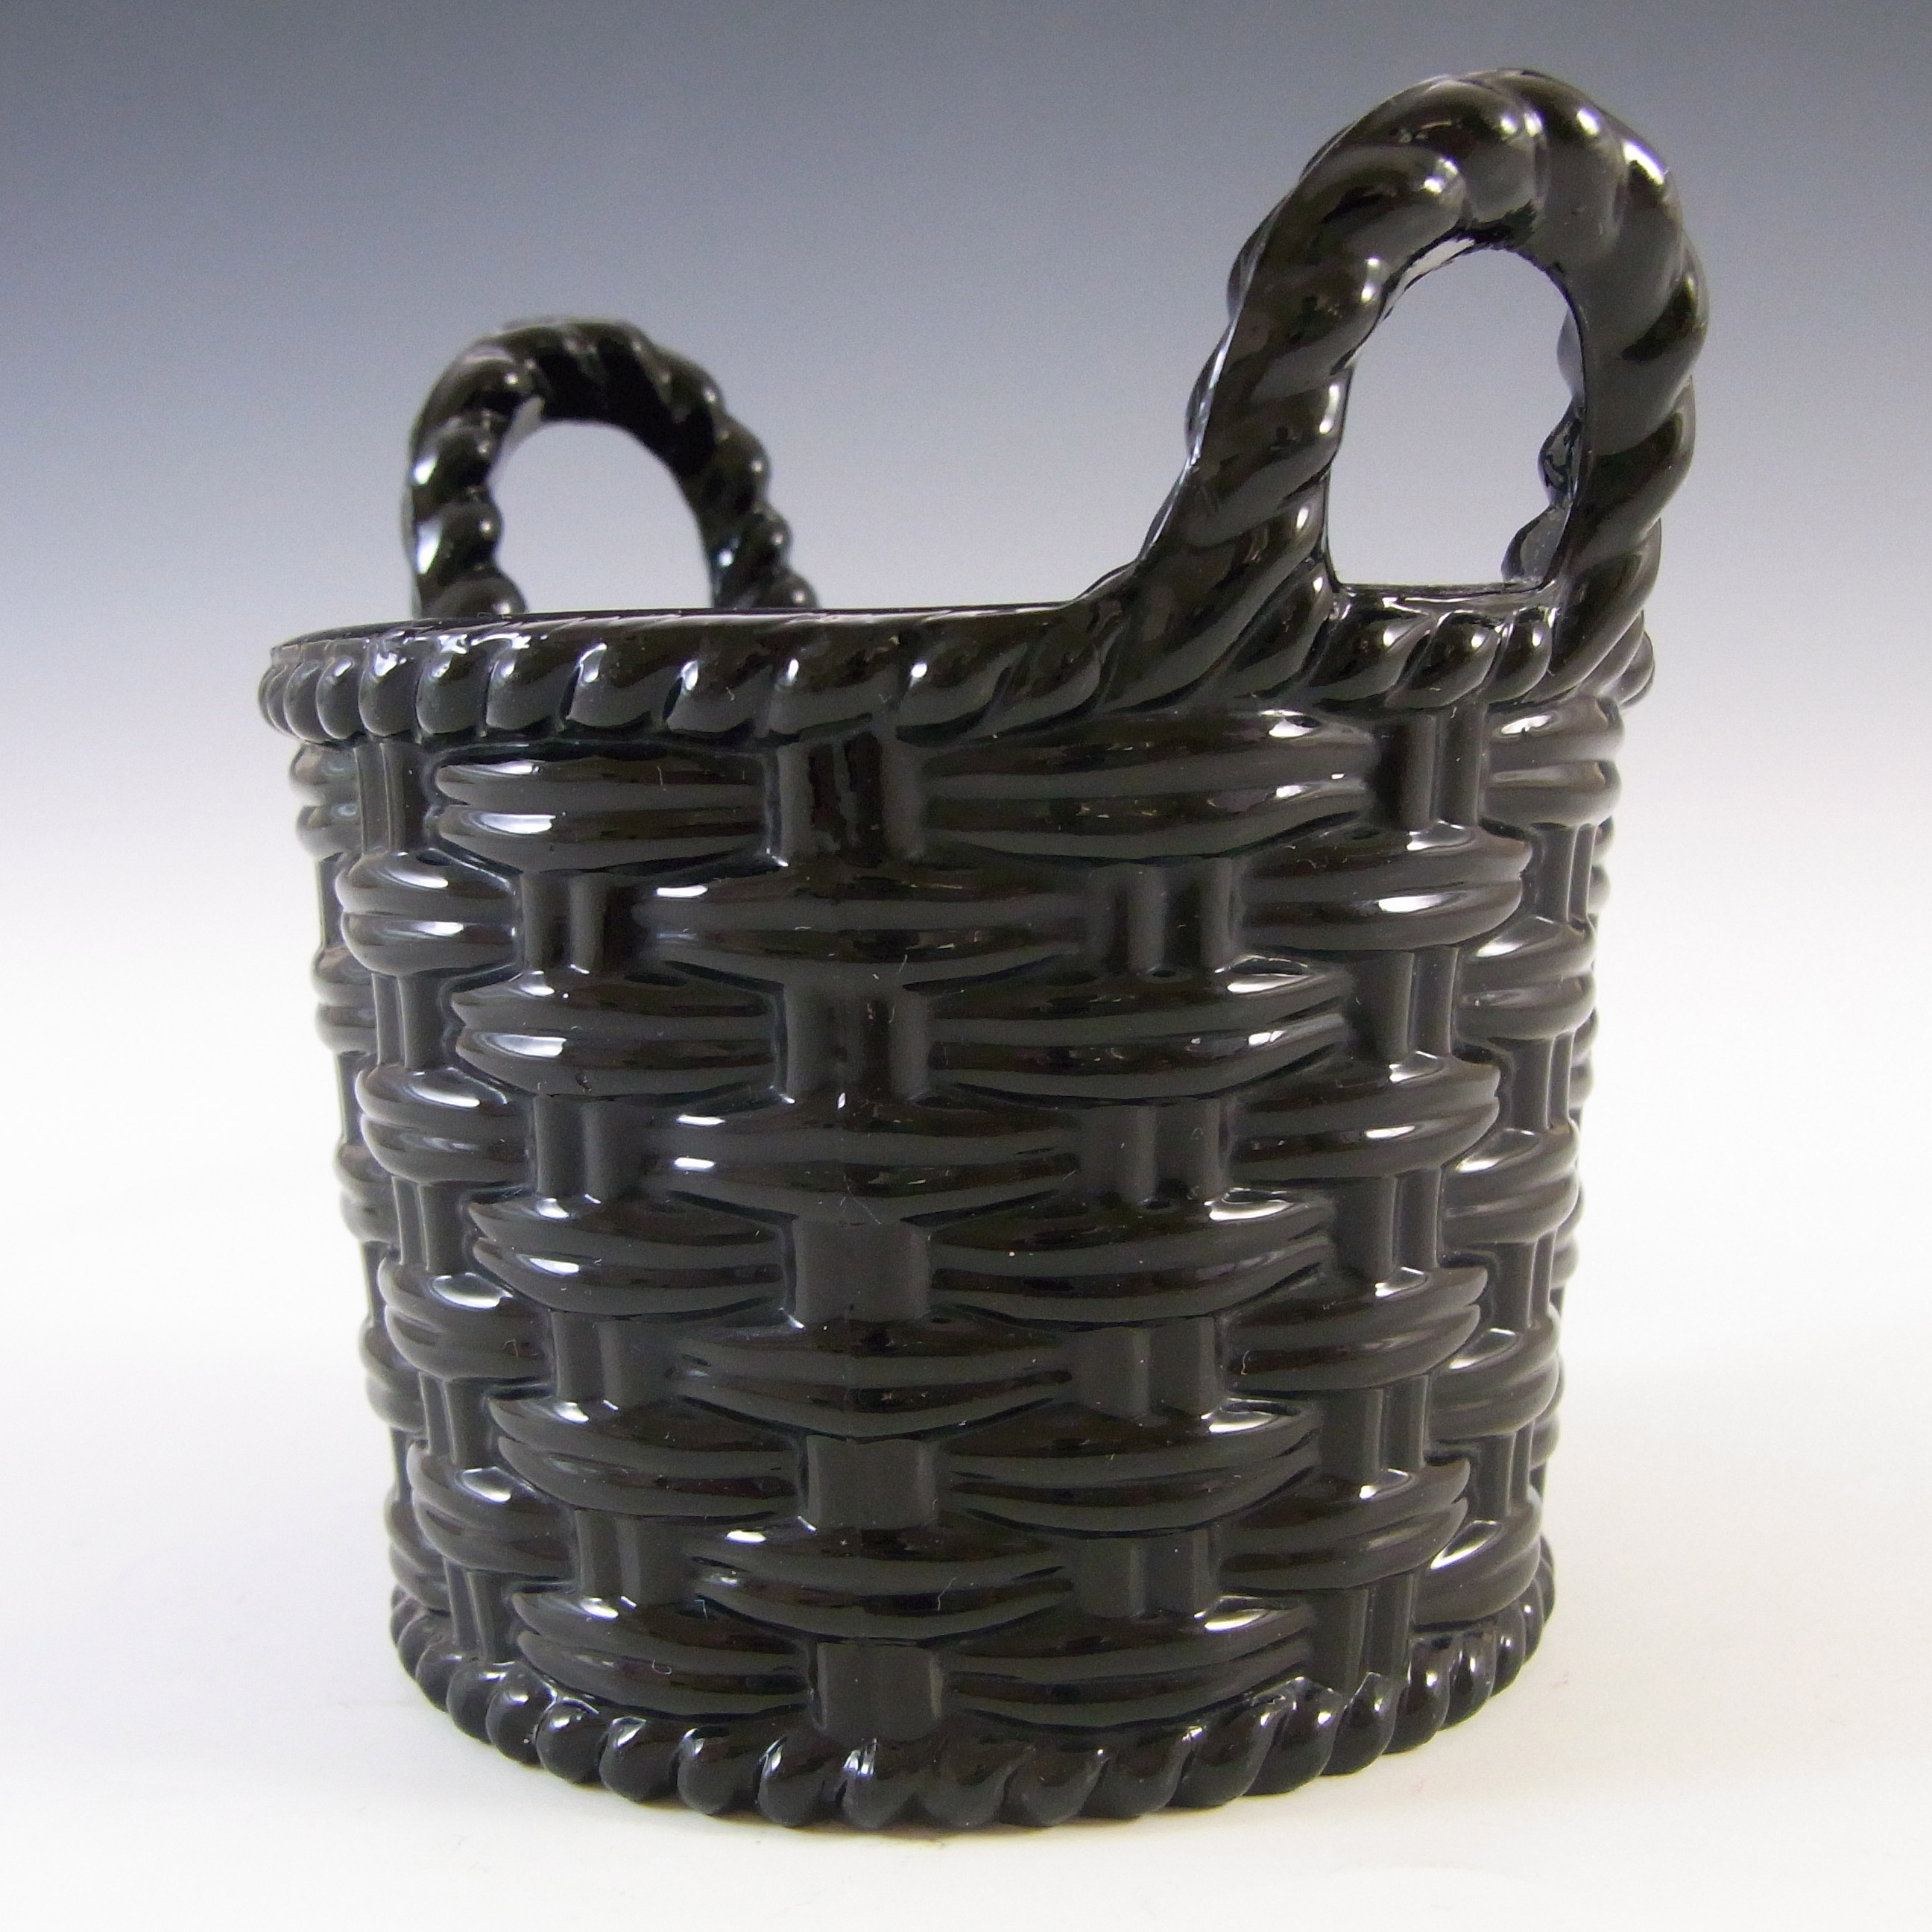 MARKED Sowerby Victorian Black Milk Glass Basket Bowl #1102 - Click Image to Close